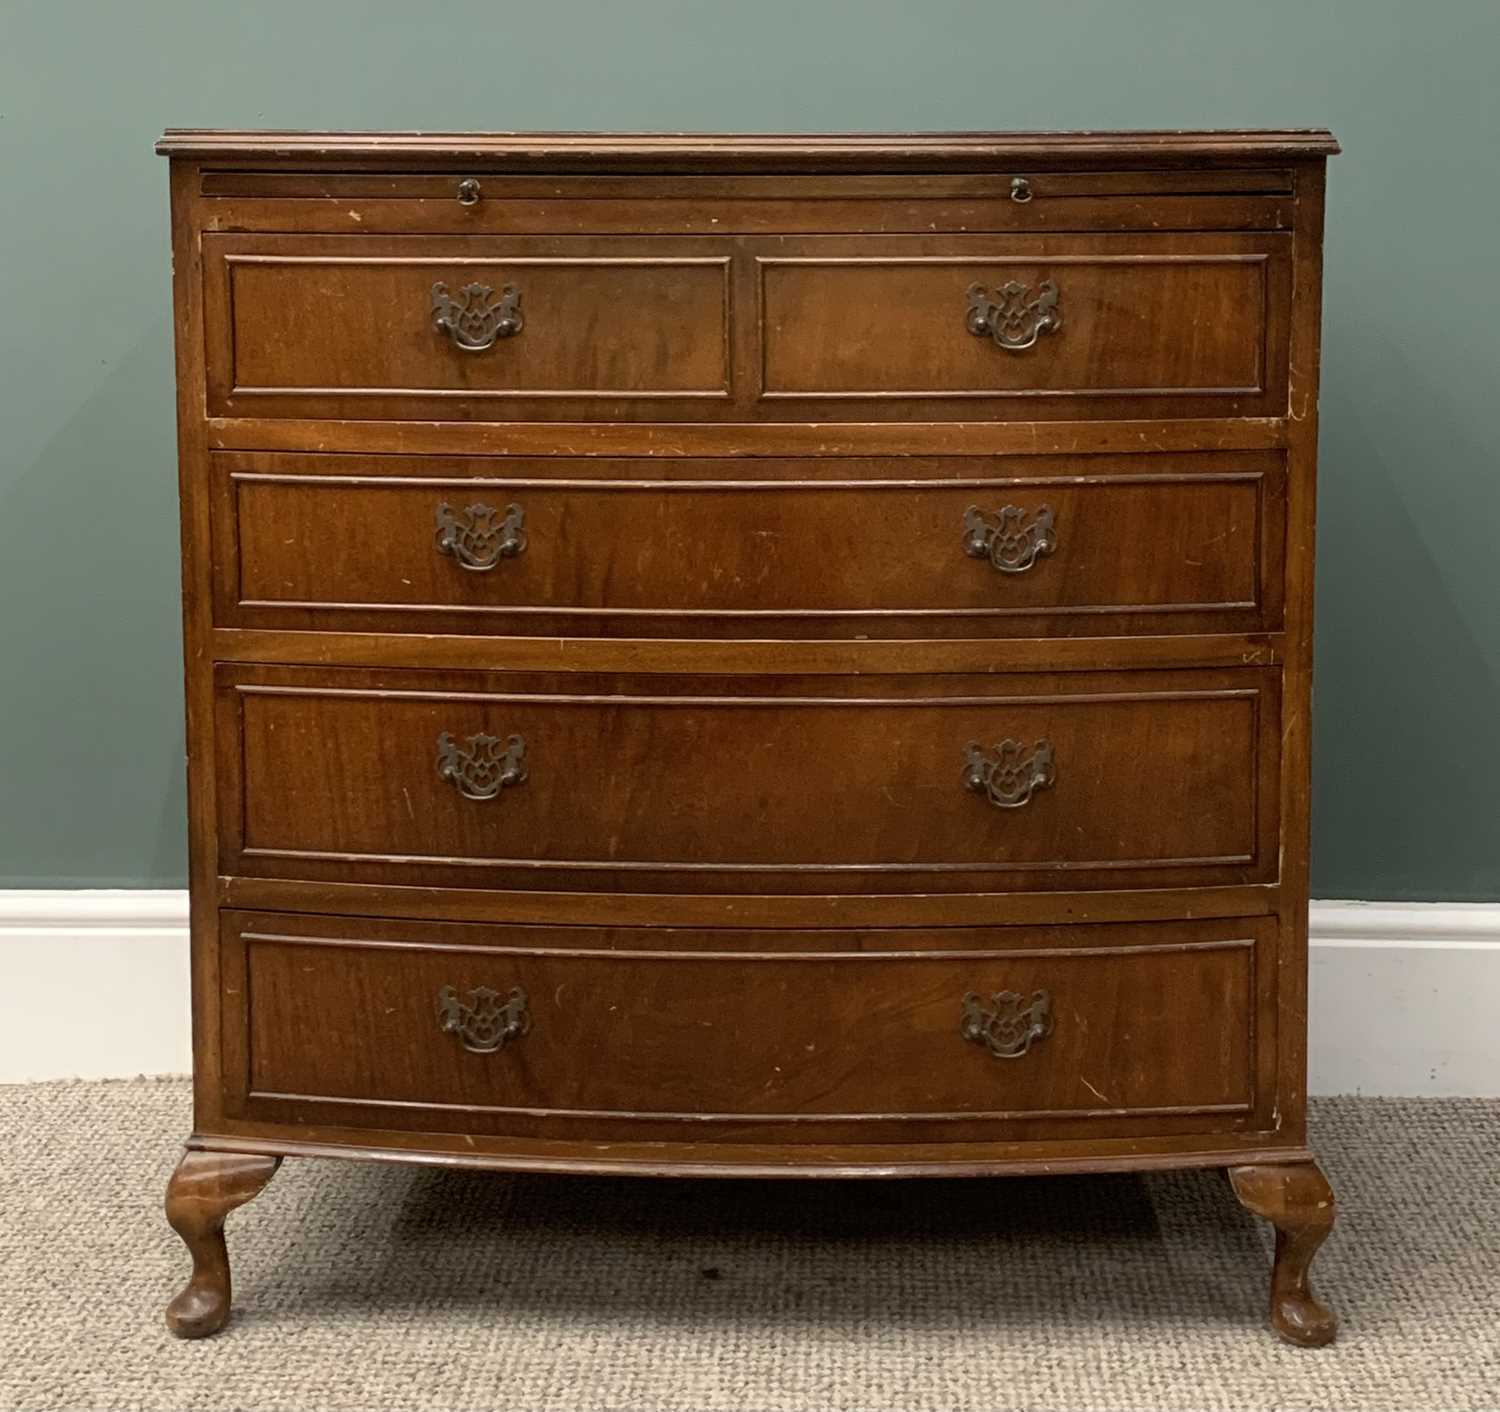 REPRODUCTION MAHOGANY BOW FRONT FOUR DRAWER CHEST, with brush slider, 83 (h) x 77 (w) x 45 (d) cms